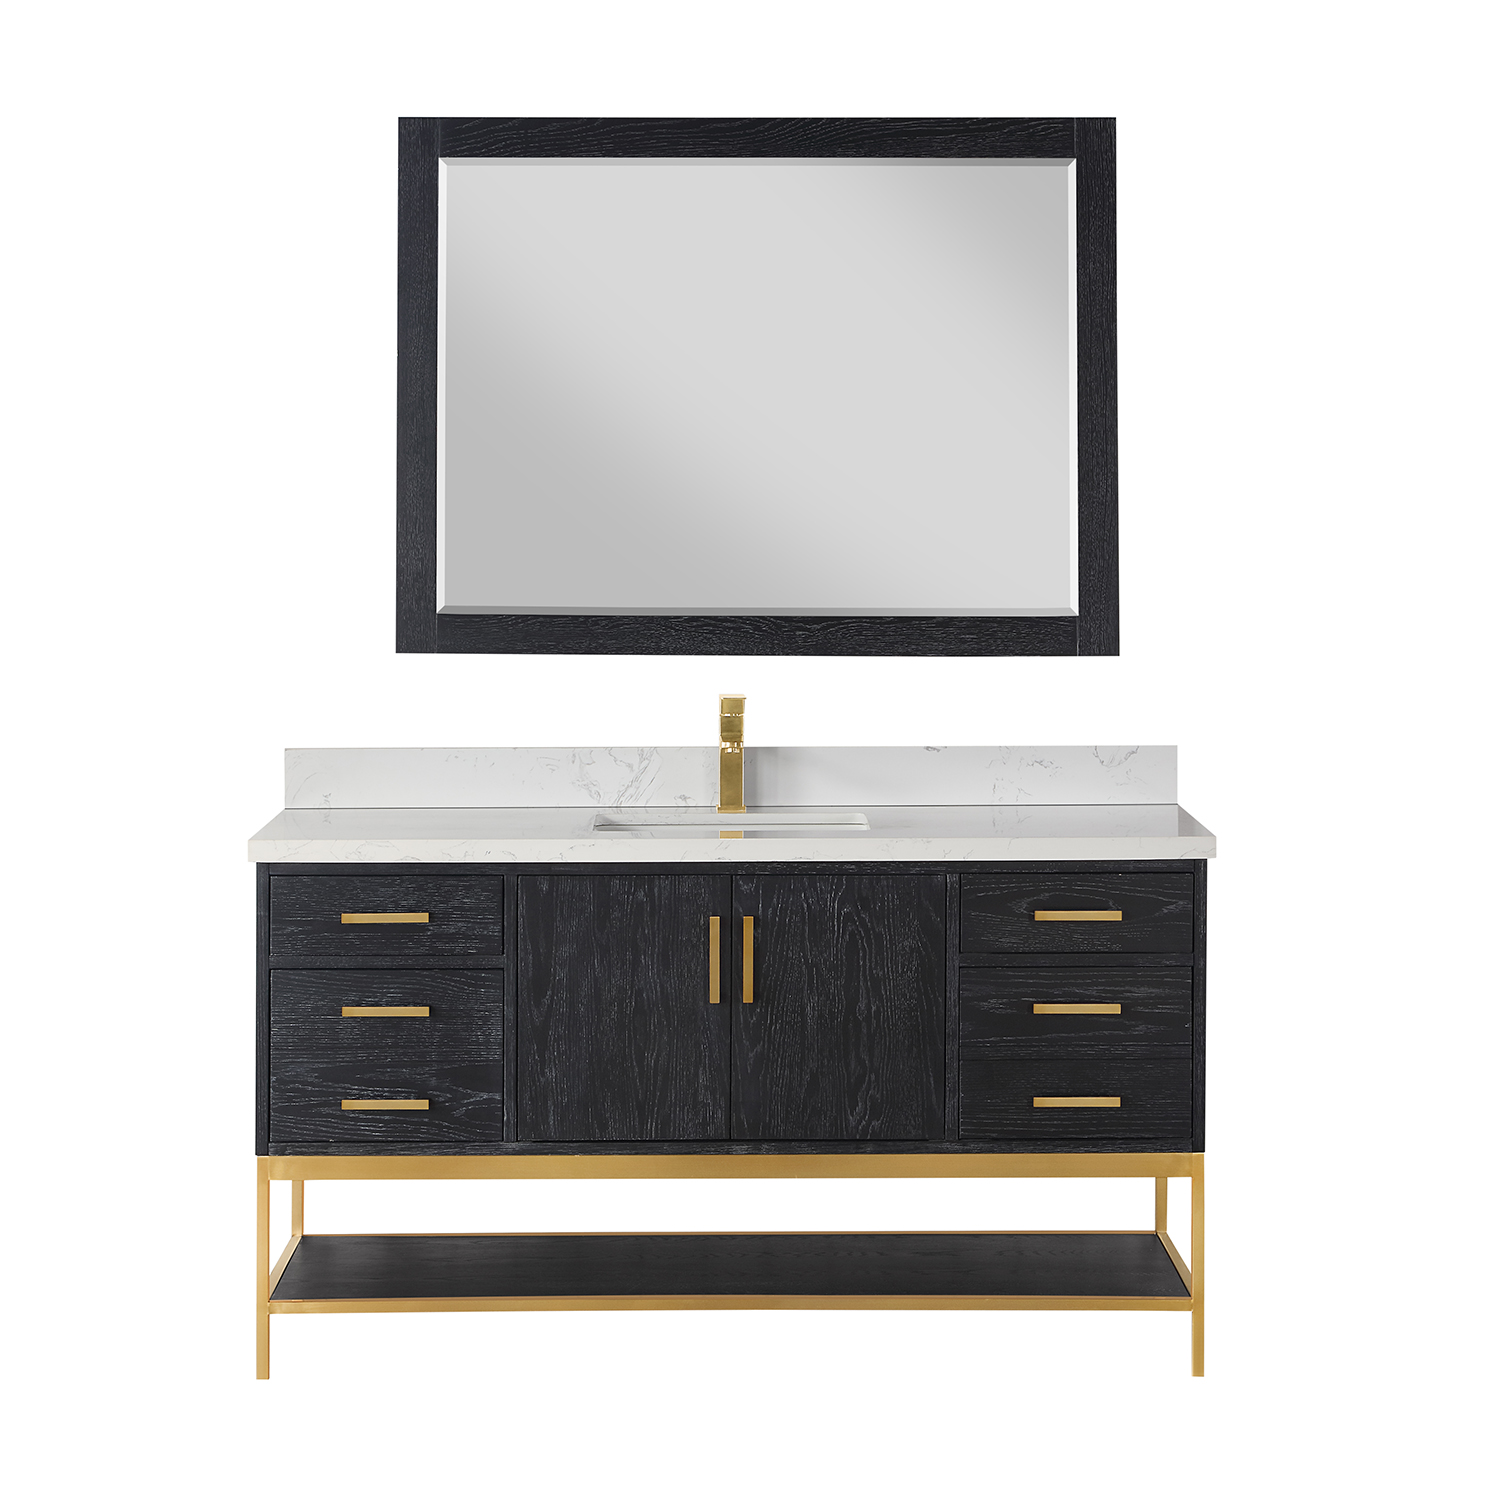 Issac Edwards Collection 60" Single Bathroom Vanity Set in Black Oak with Grain White Composite Stone Countertop without Mirror 